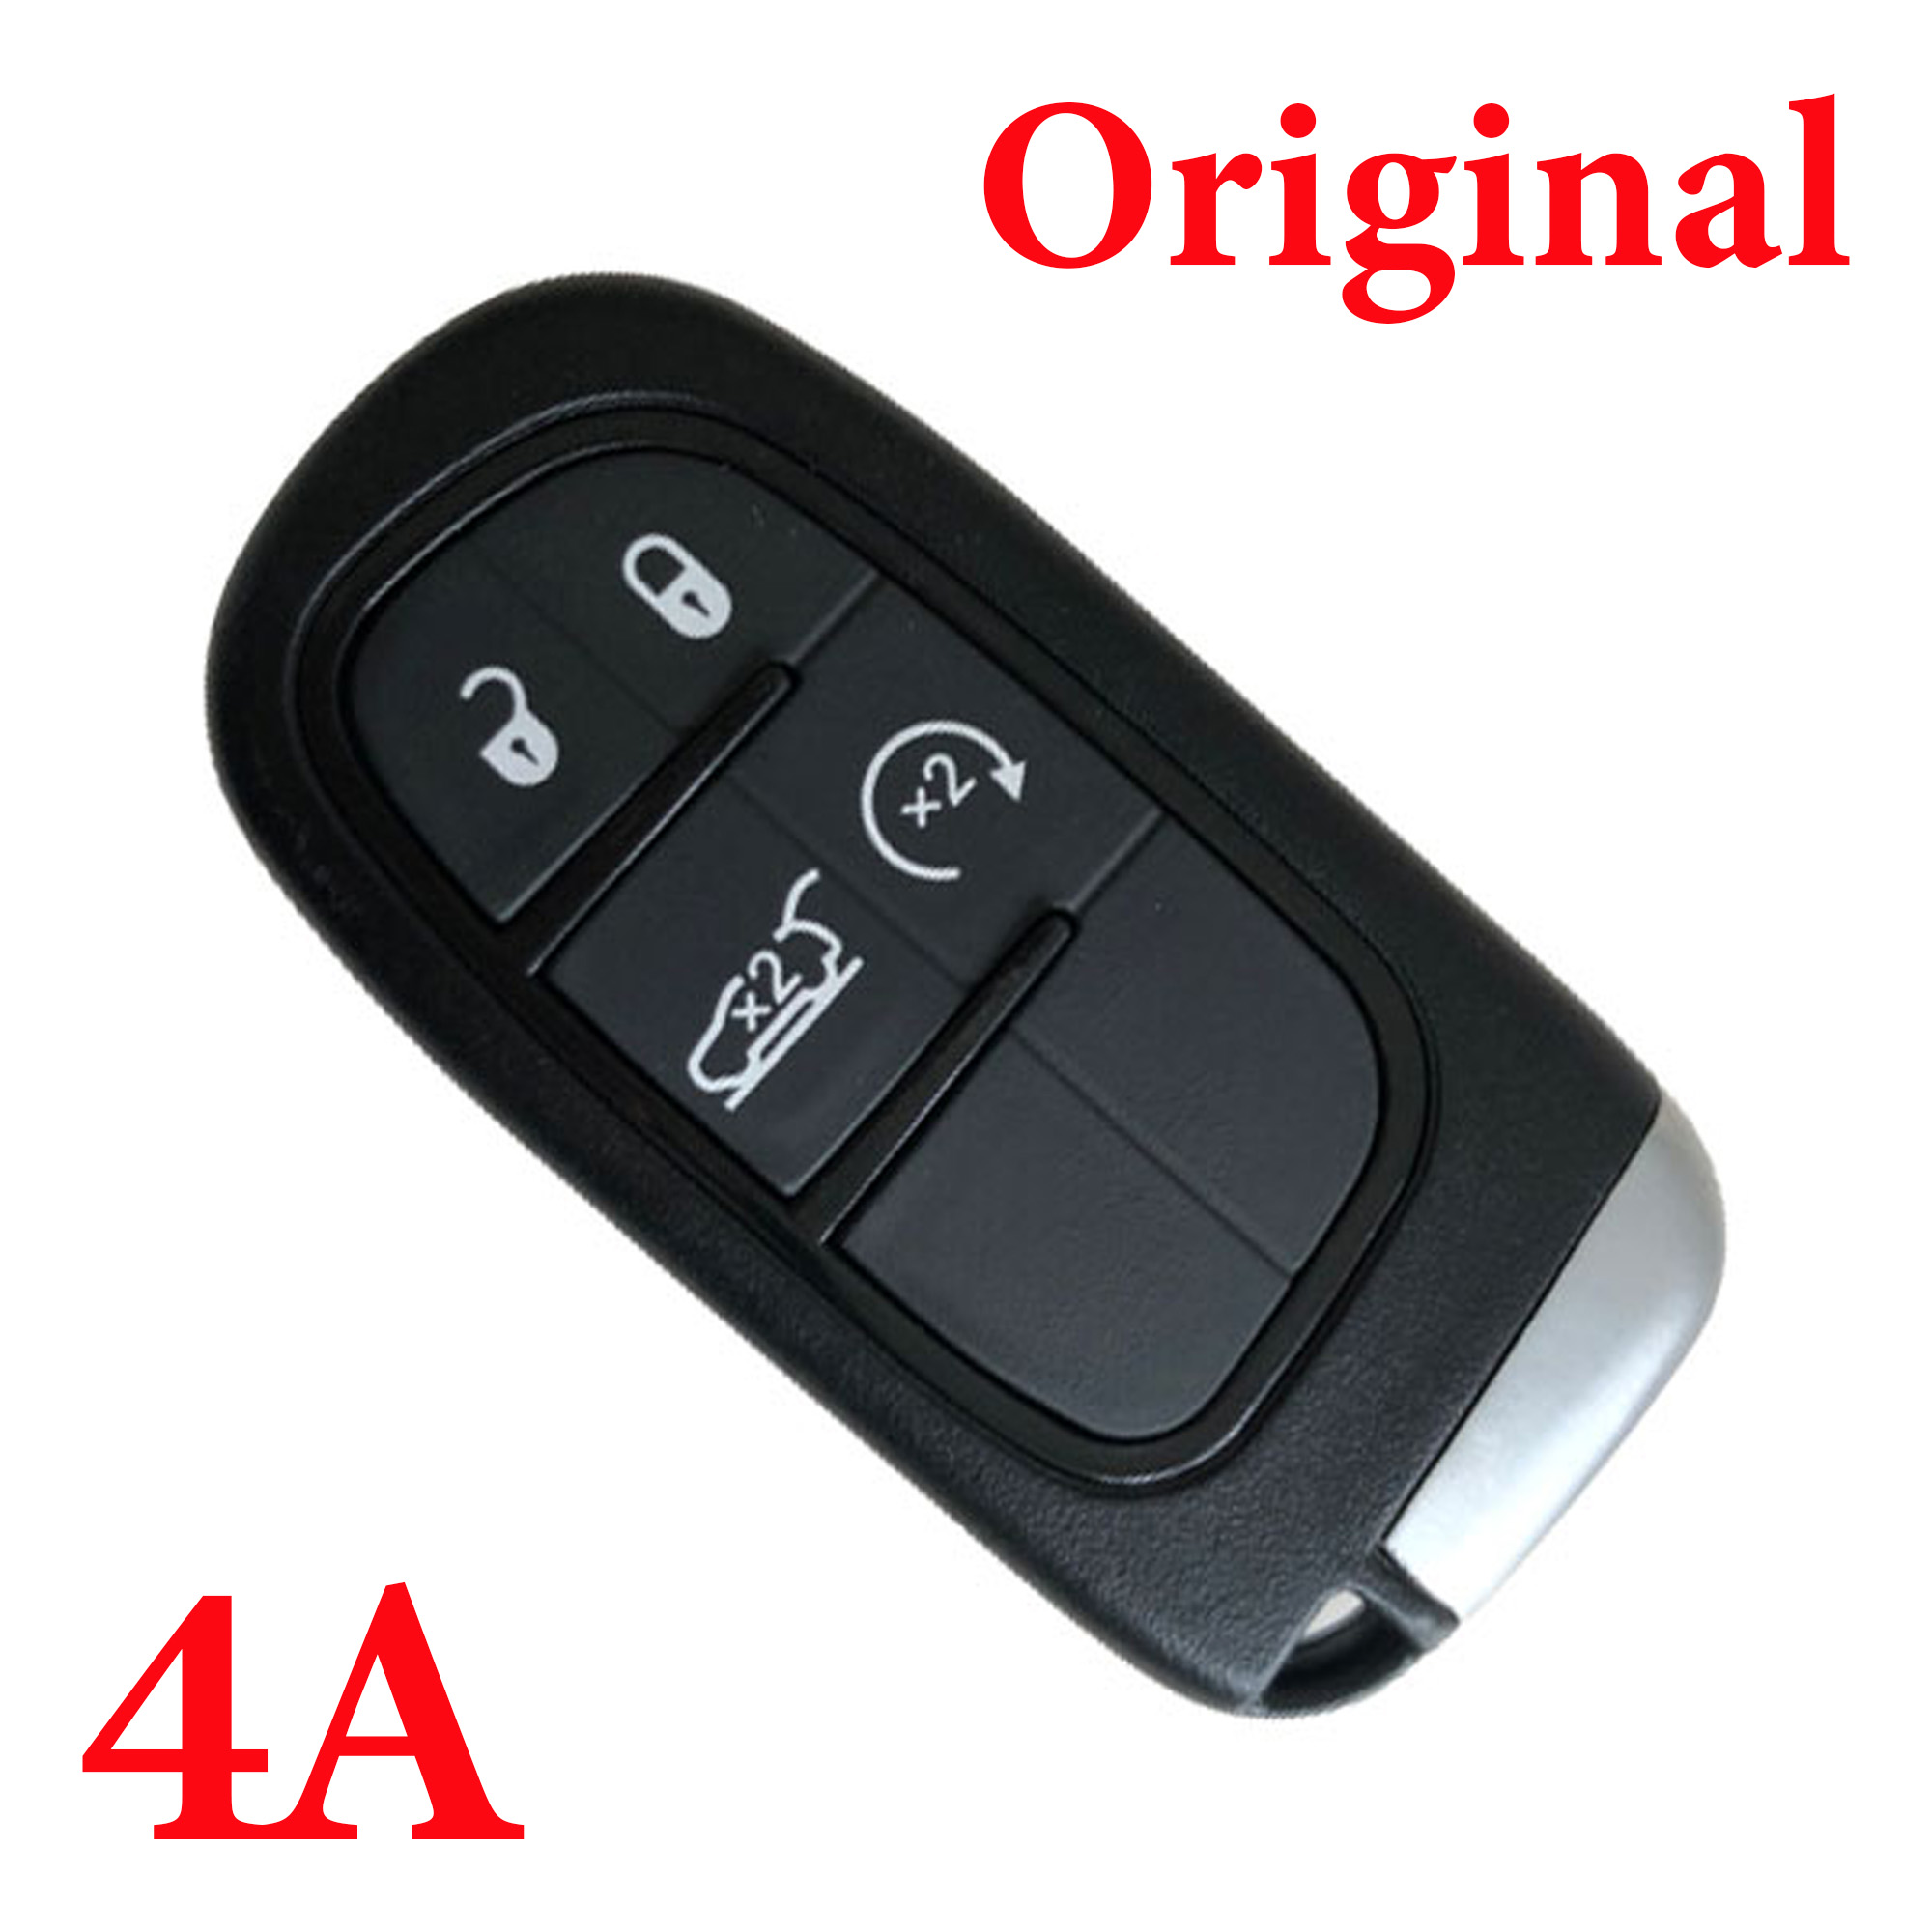 Original 4 Buttons Smart Proximity Key for Jeep Cherokee 2014-2018 GQ4-54T （ 4A Chip）